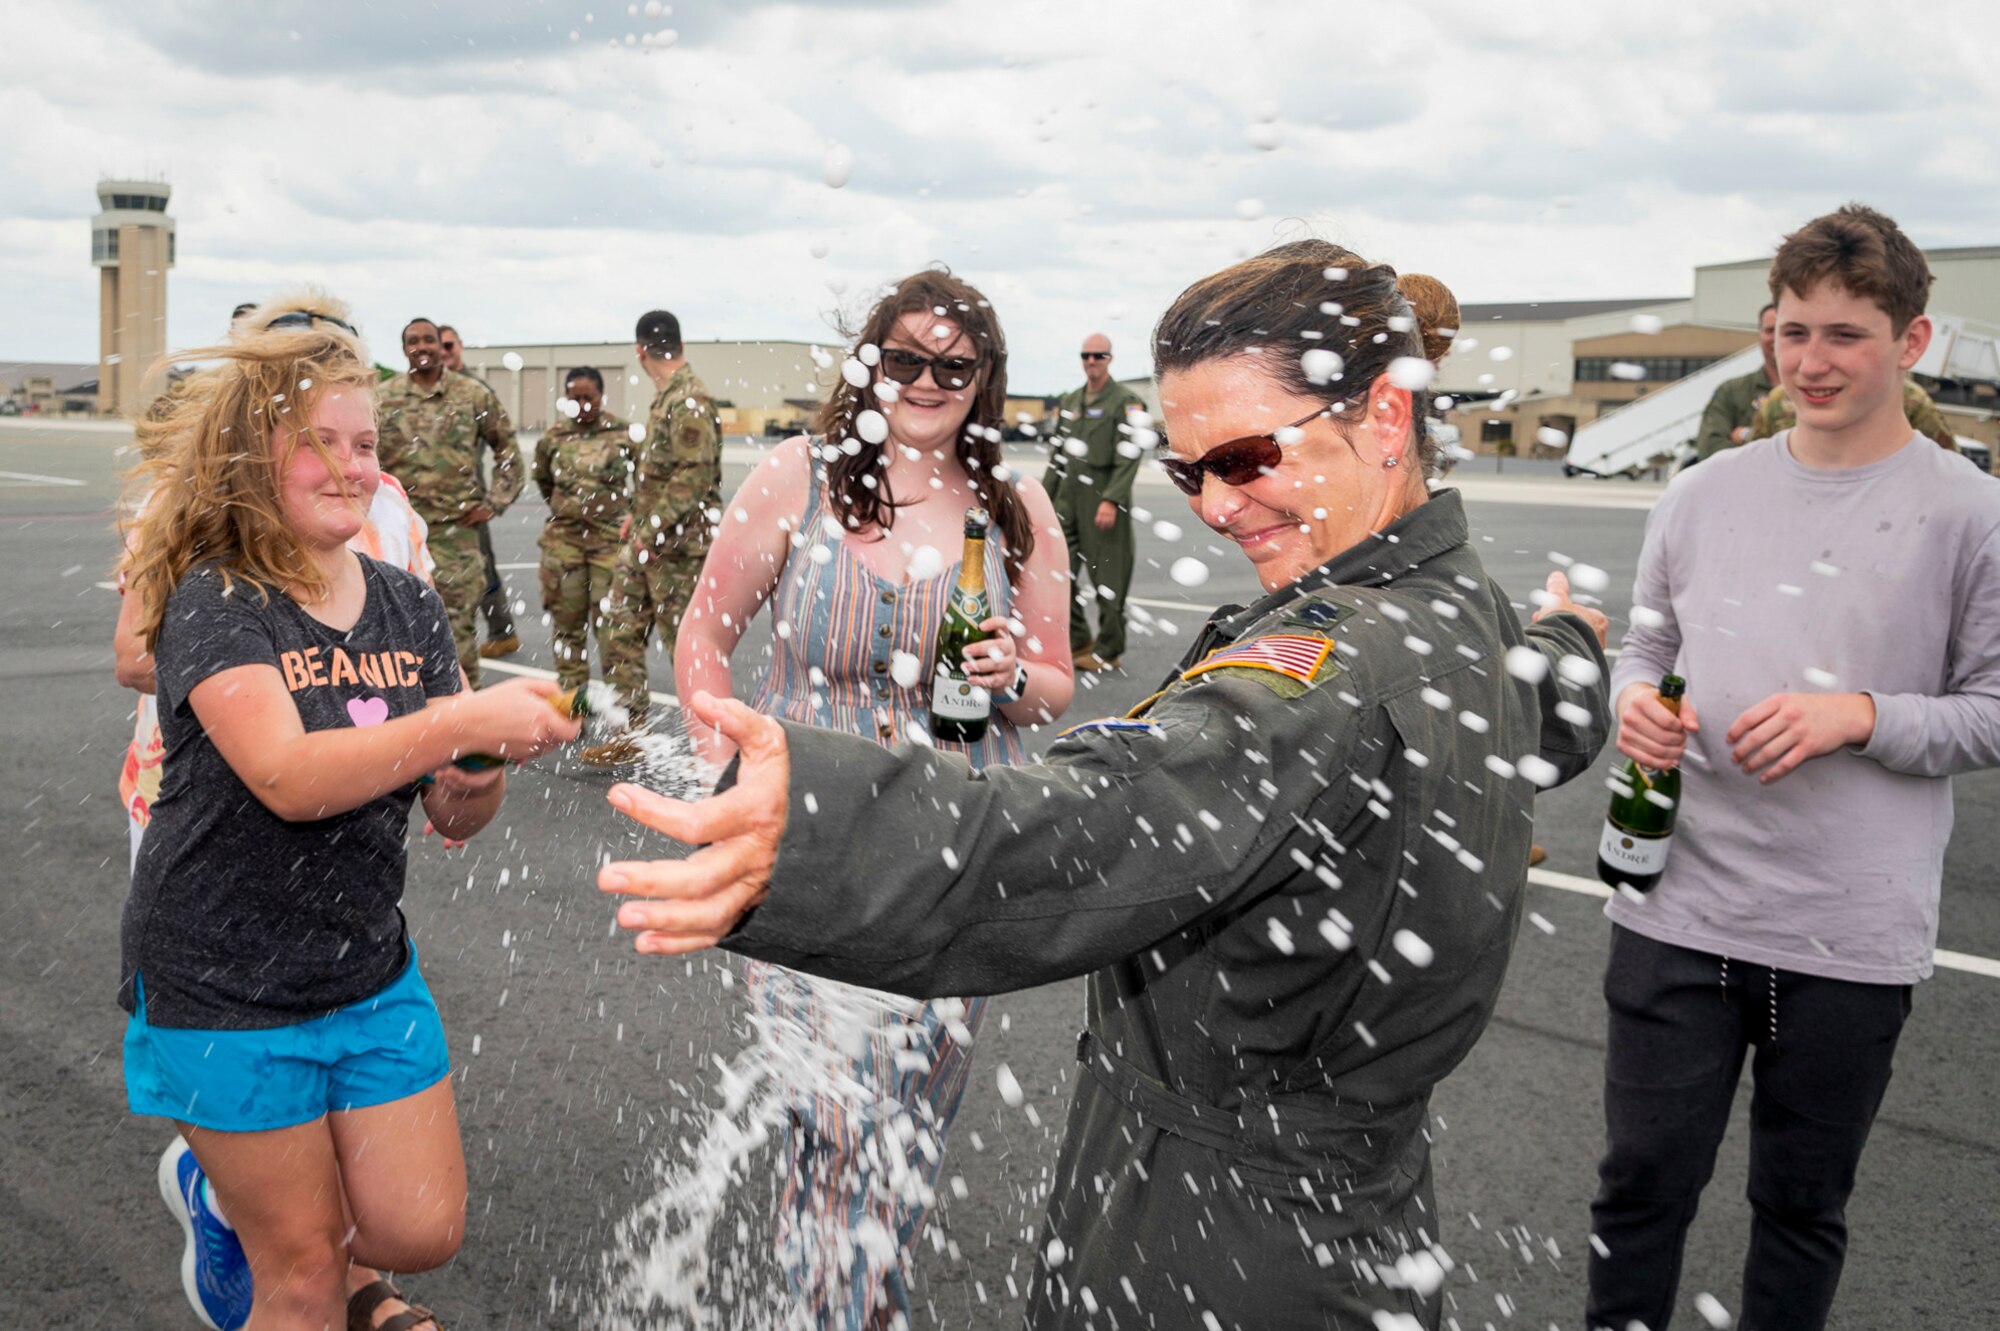 U.S. Air Force Lt. Col. Anita West-Werner, 512th Operations Group, Dover Air Force Base, Delaware, gets drenched by family and friends after her final flight June 7, 2022. A final flight, also known as fini-flight, is a tradition for pilots and some aircrew members who are retiring or moving to another base. West-Werner flew her final flight after 26 years with the 512th AW. (U.S. Air Force photo by Mauricio Campino)